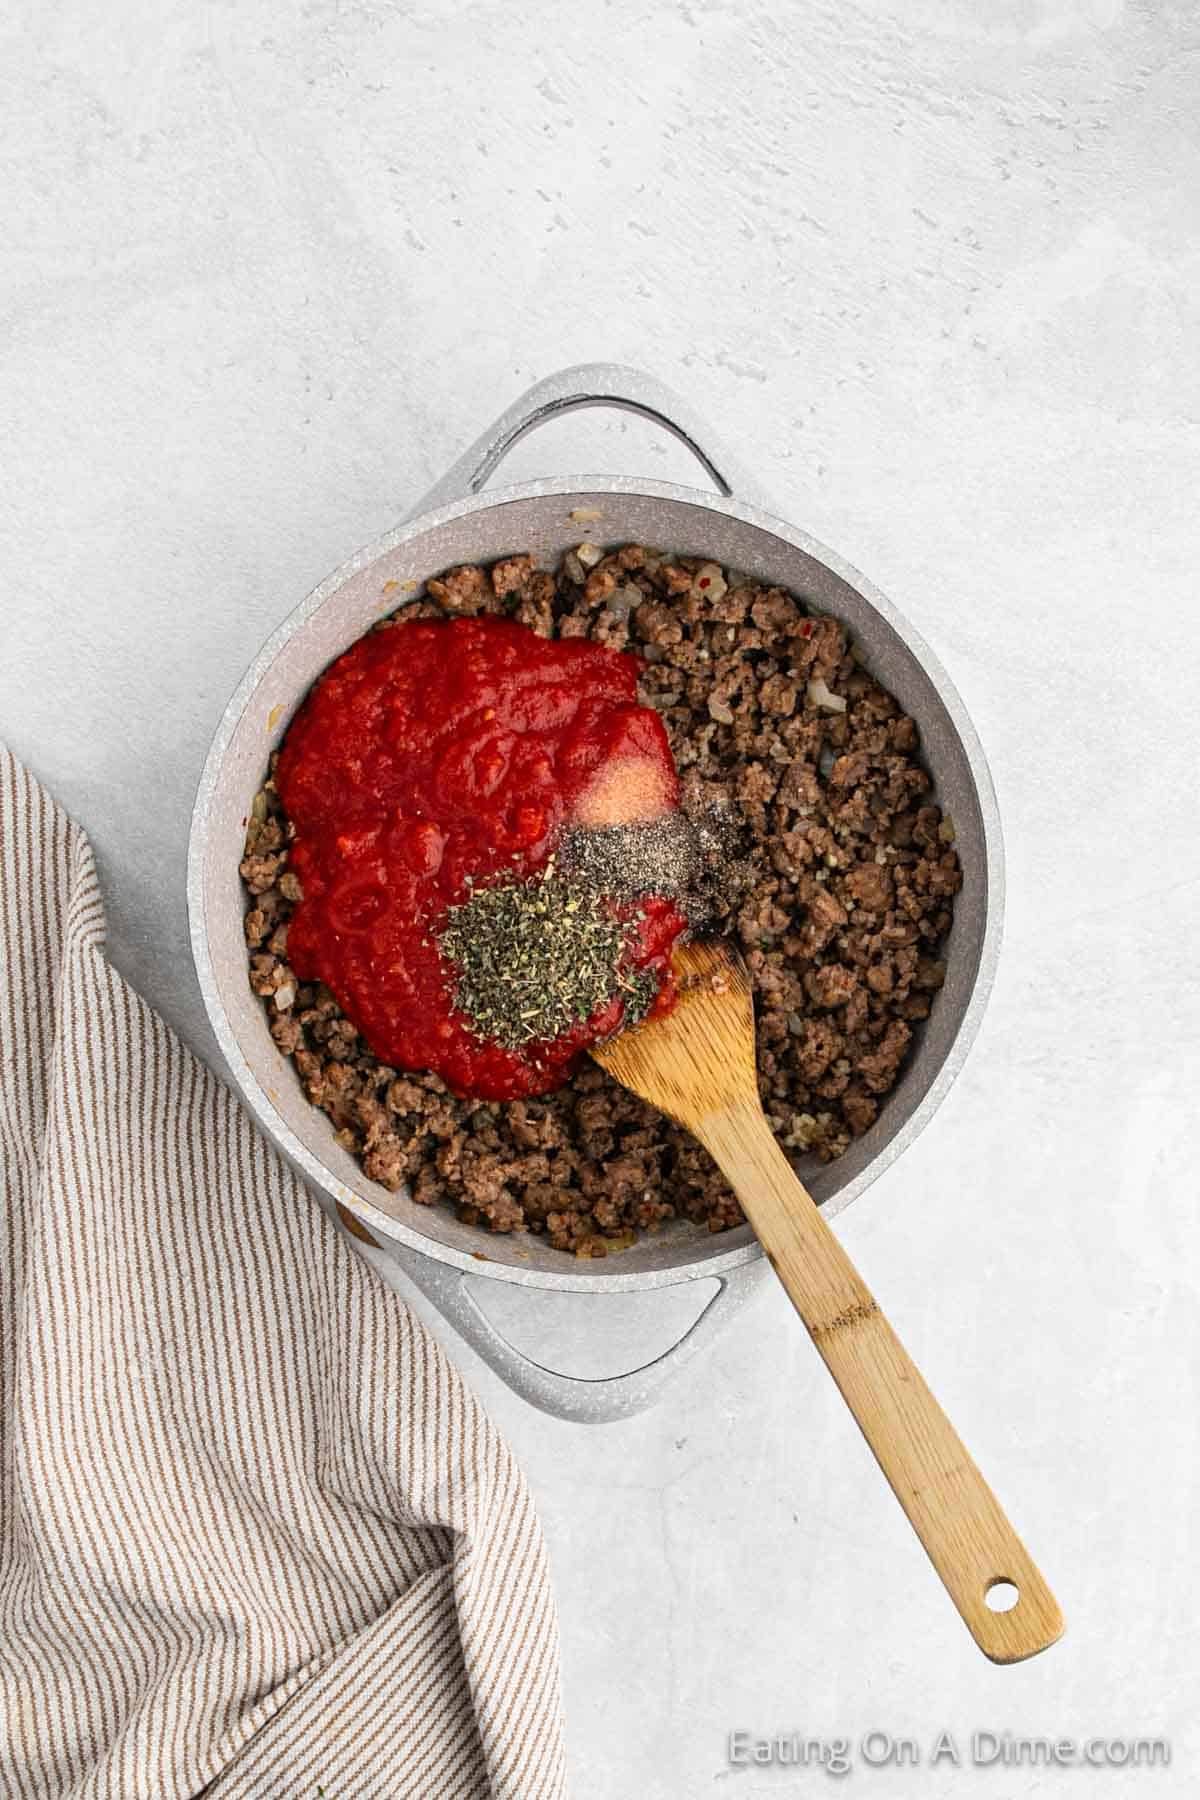 A pot filled with cooked ground beef topped with tomato sauce and sprinkled with herbs. A wooden spoon rests inside the pot, which is placed on a light gray surface next to a beige striped cloth—perfect for your next stuffed zucchini boats recipe.